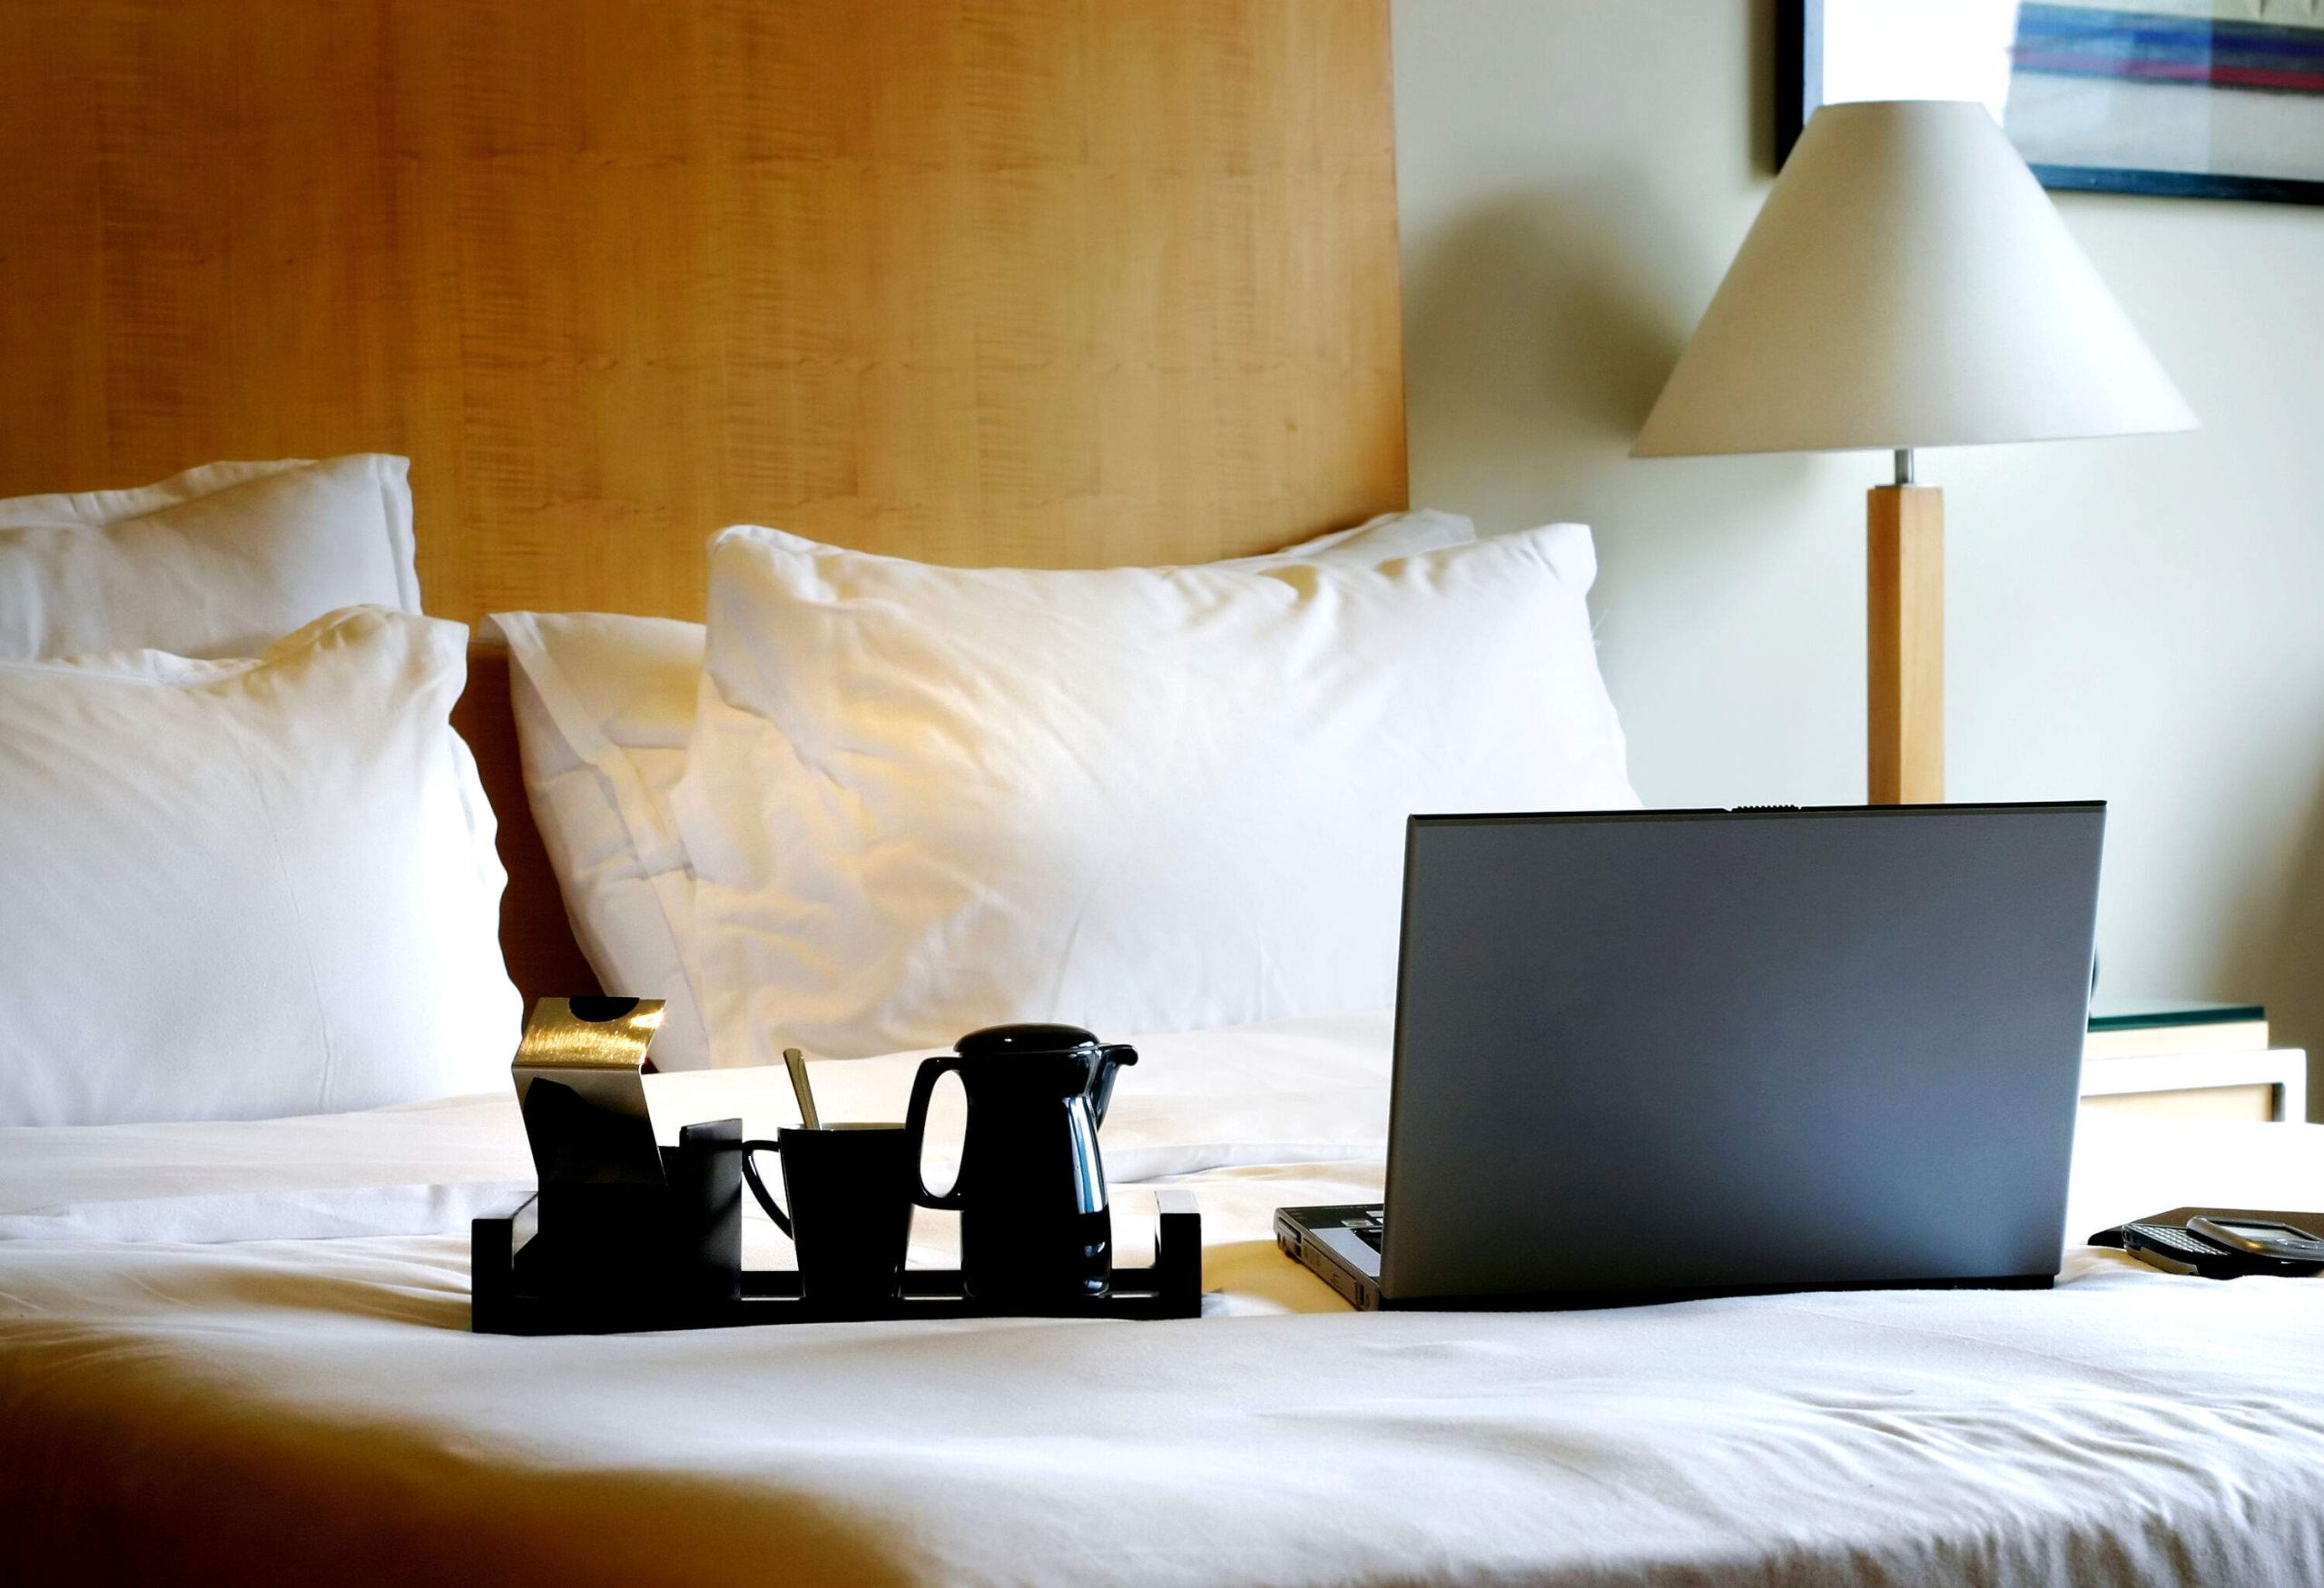 A laptop and black coffee ware in a white bed with a wooden headboard.